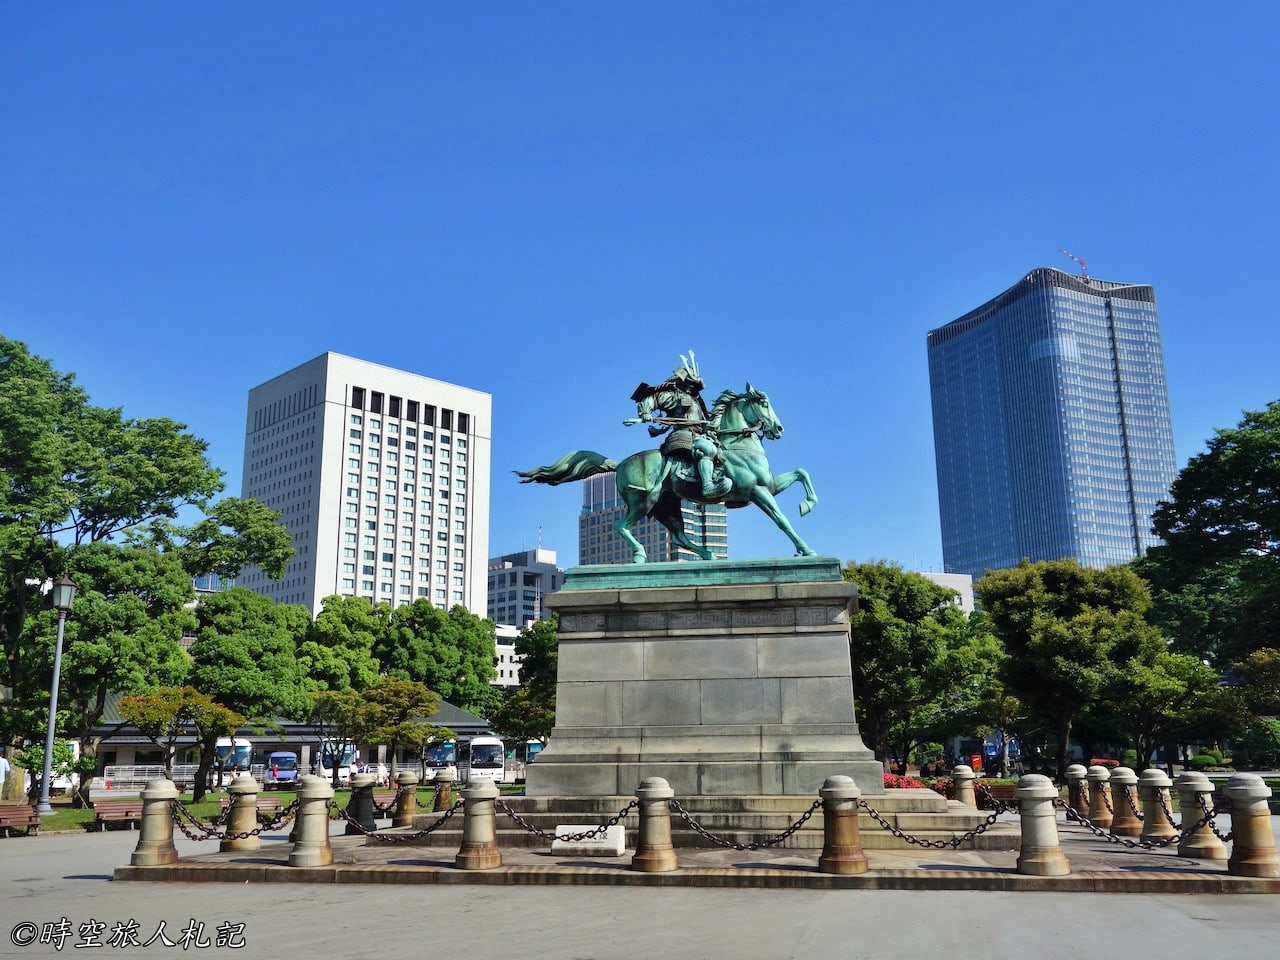 Tokyo,Tokyo 3 Days Tours,Tokyo 3 Days Tours Itinerary,Tokyo Attractions,Tokyo Downtown 52